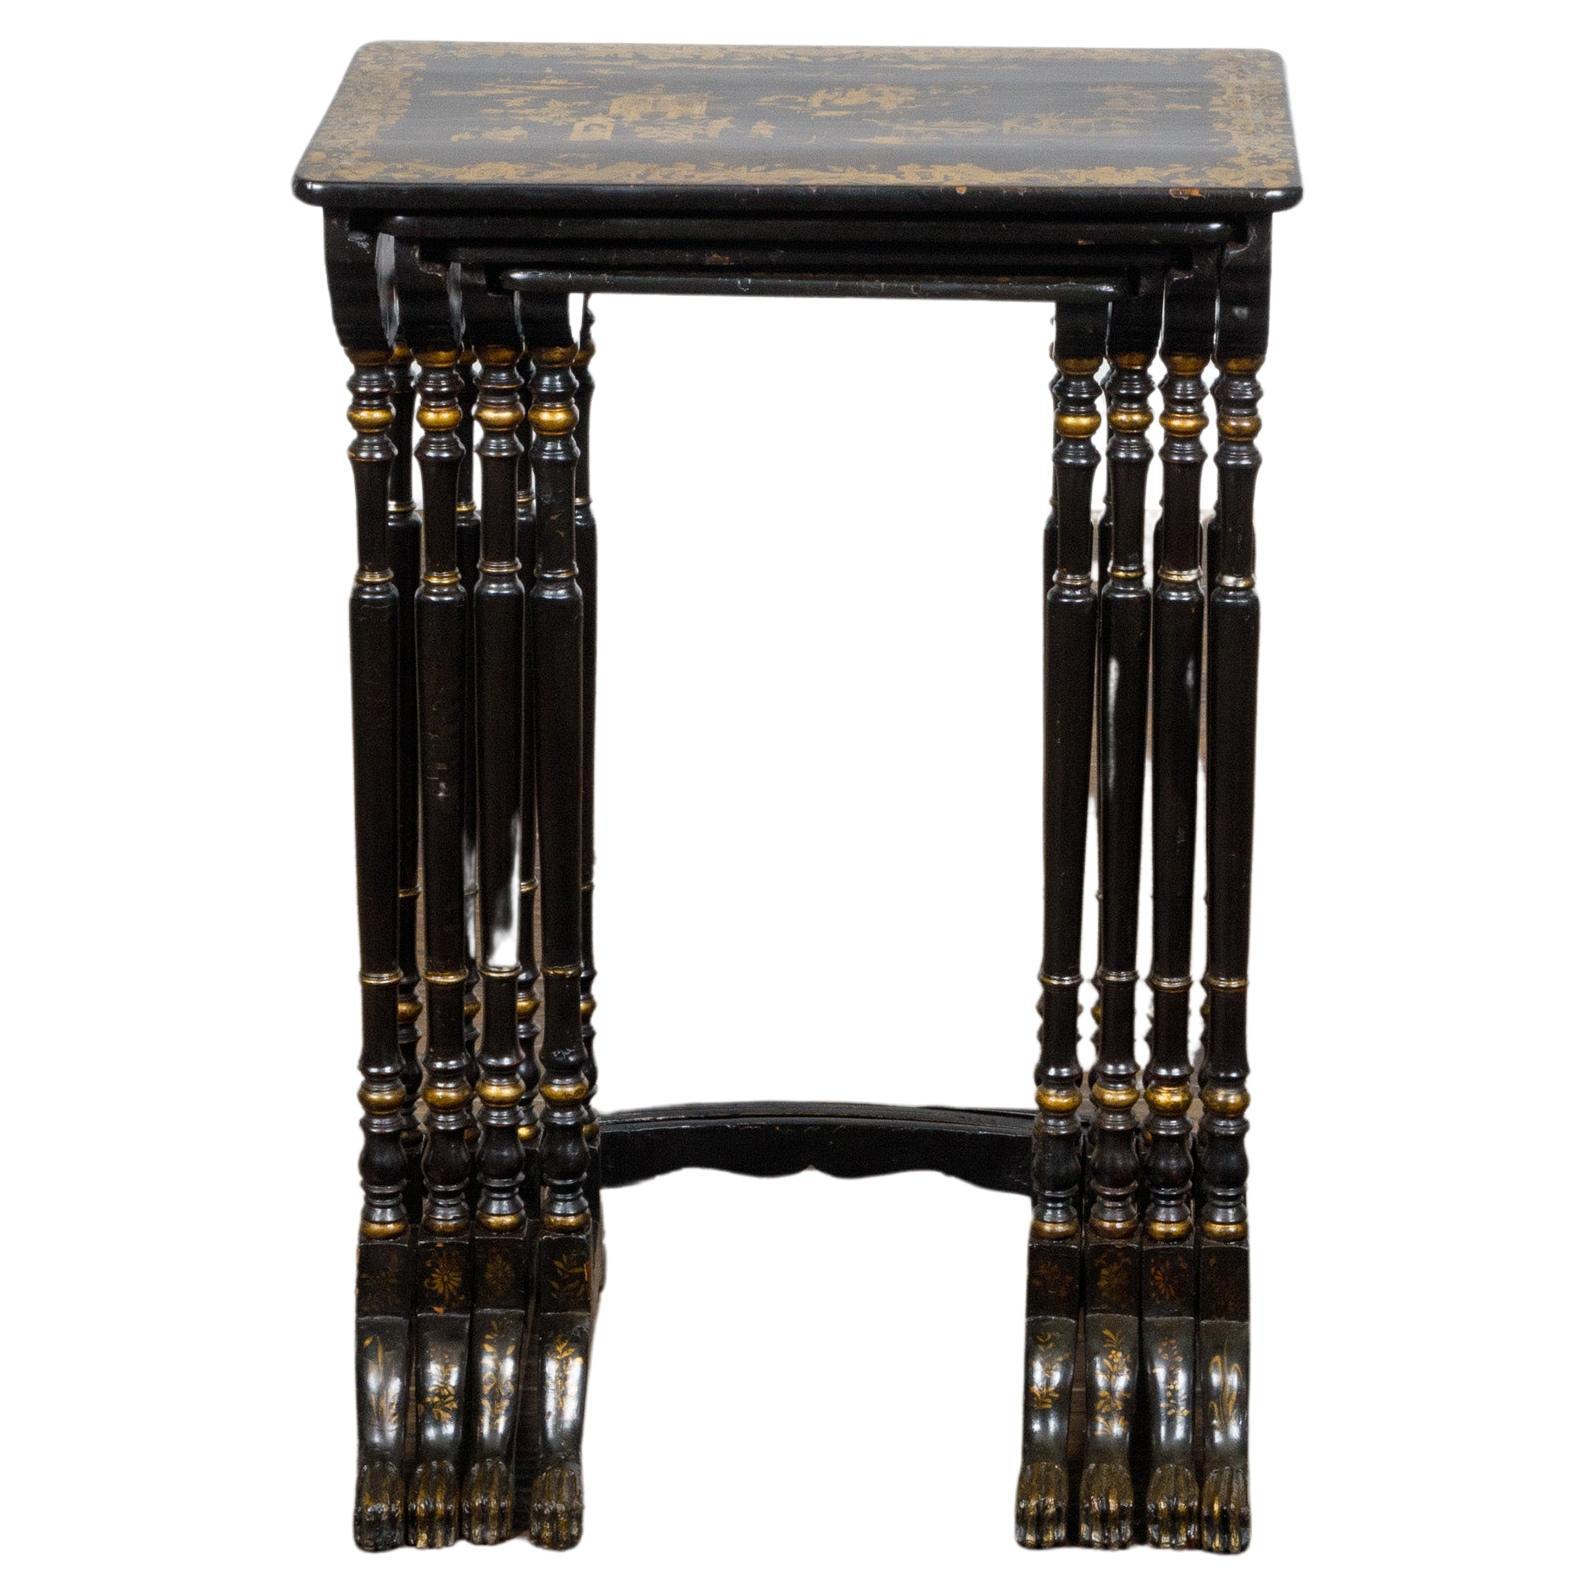 A set of four English black and gold nesting tables from the 19th century with Chinoiserie décor, slender turned legs and bow front stretcher. This exquisite set of four English nesting tables from the 19th century features a stunning black and gold